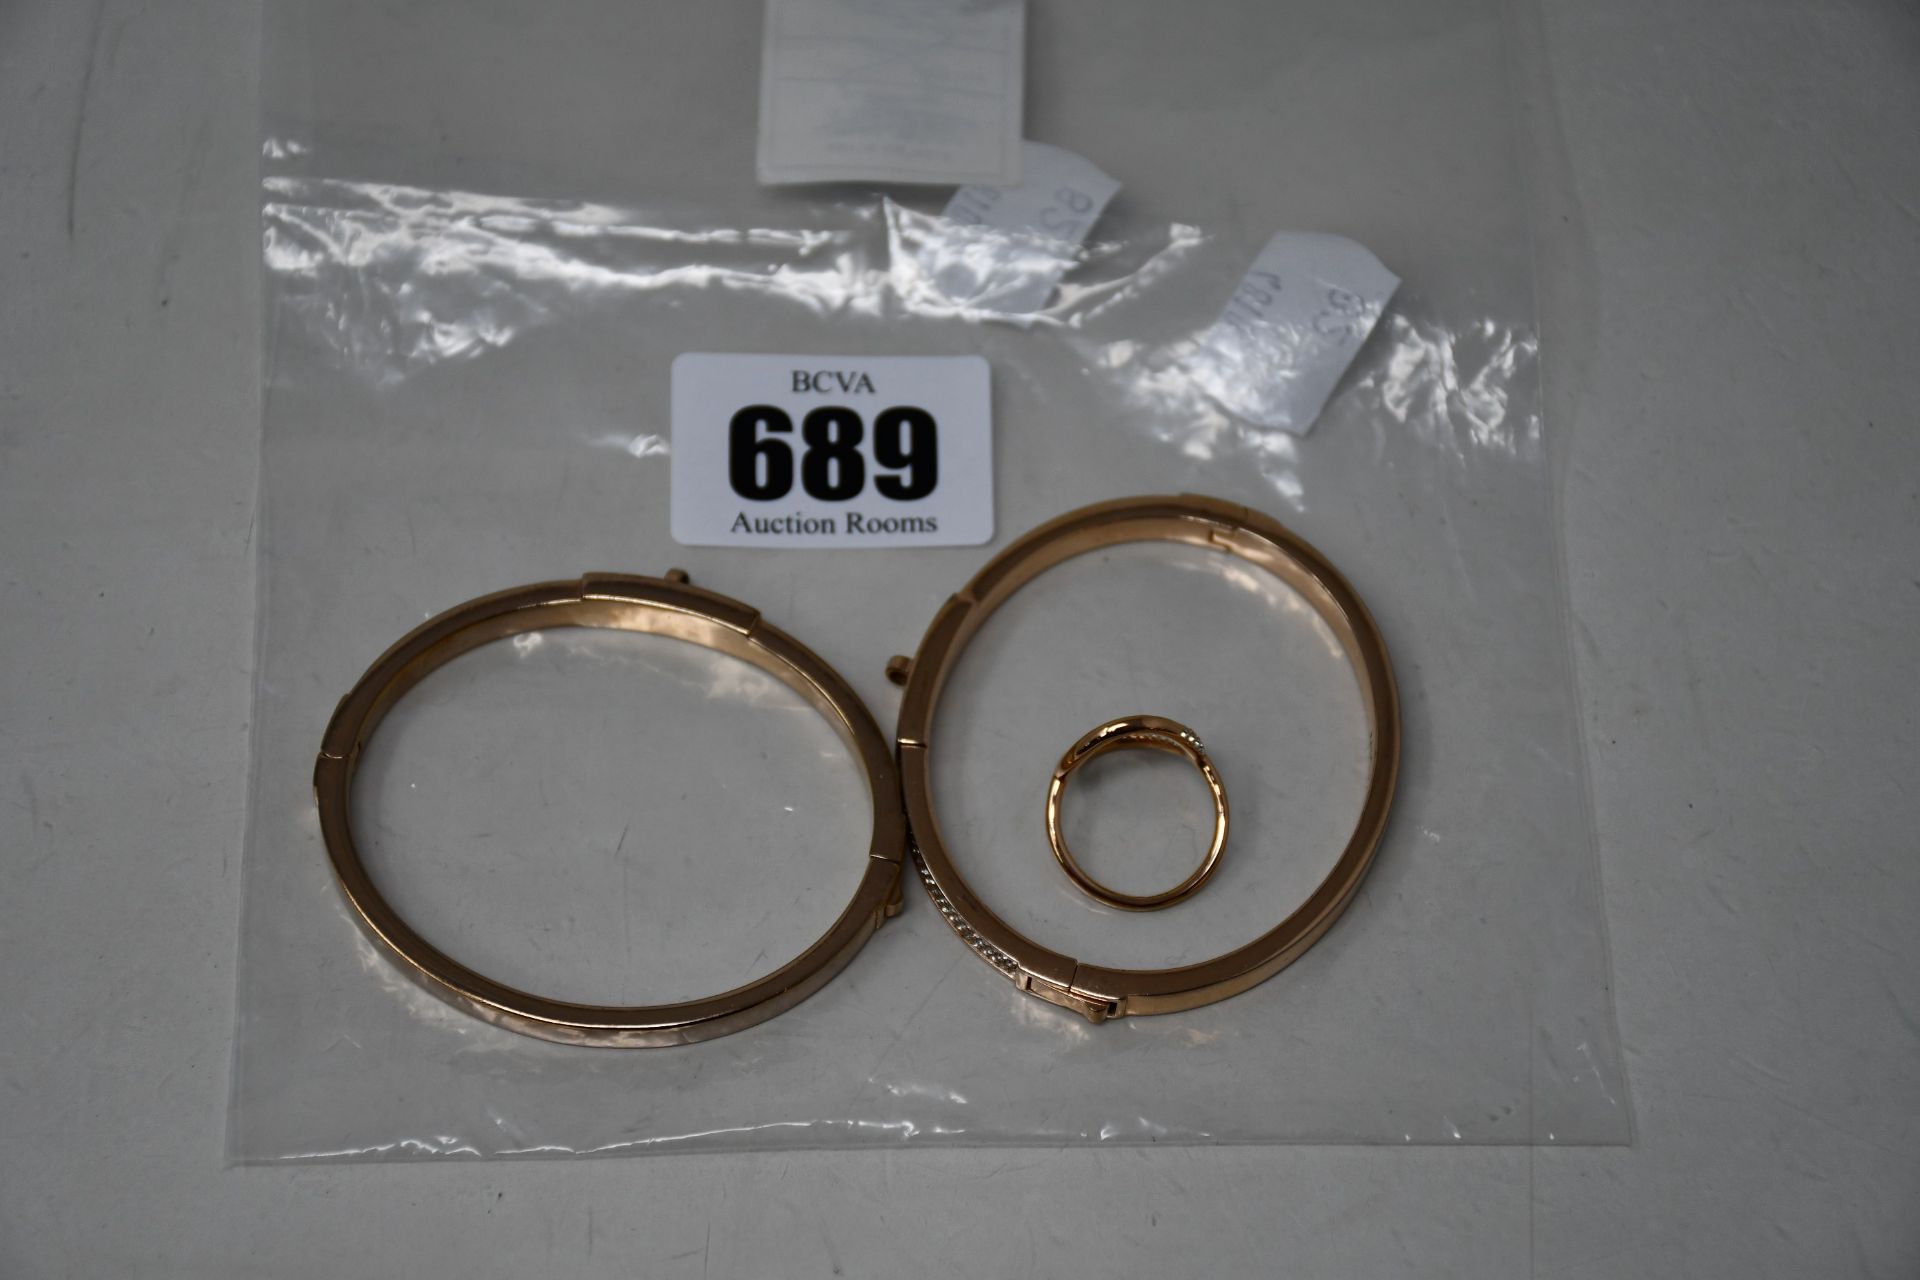 Two pre-owned Michael Kors hinged bangles both lacking charms and a pre-owned Michael Kors ring size